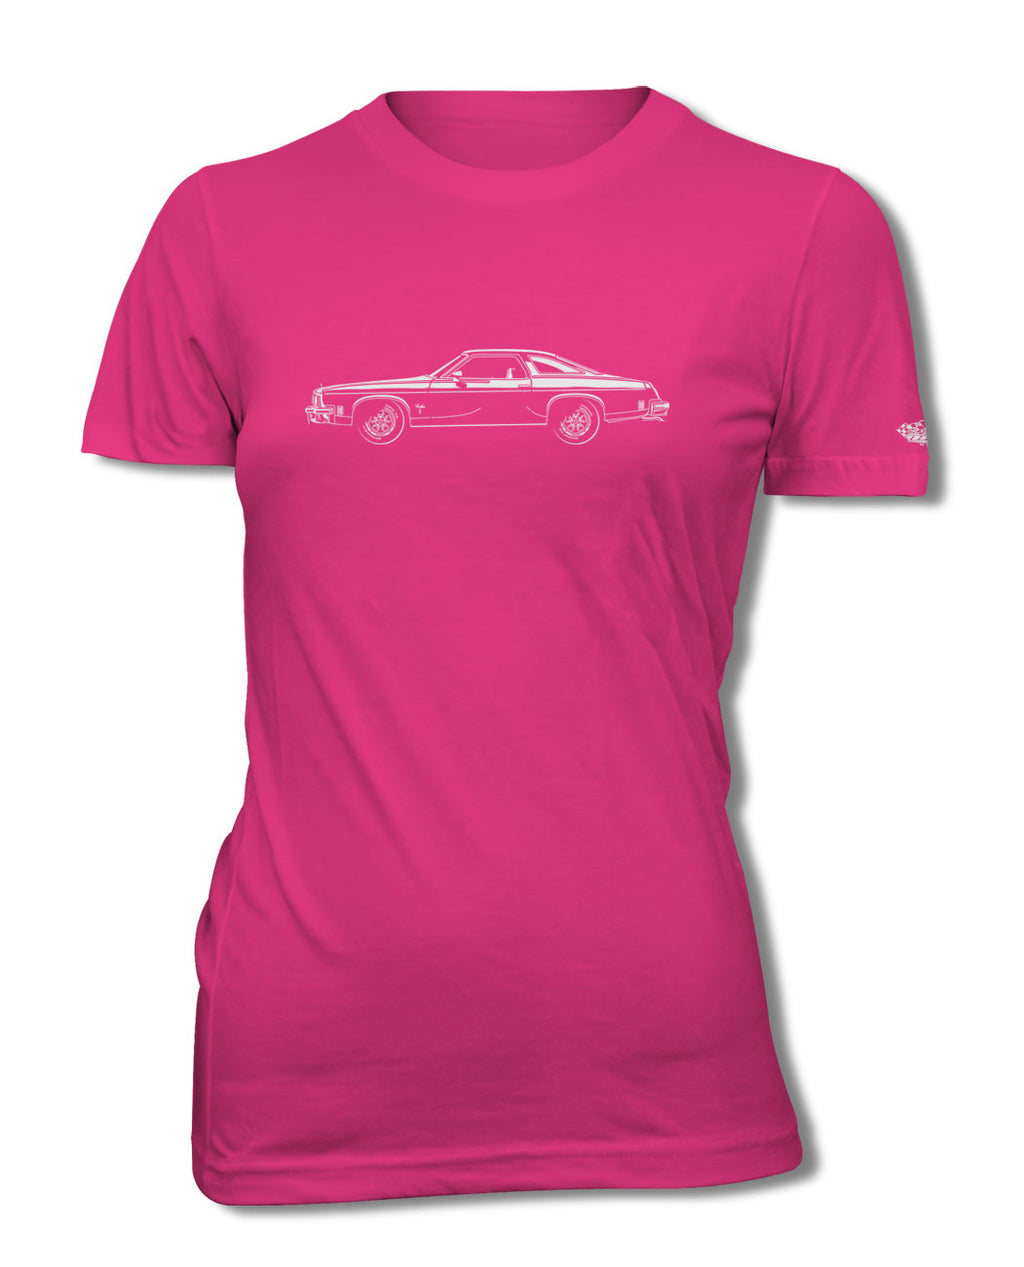 1974 Oldsmobile Cutlass S Coupe T-Shirt - Women - Side View